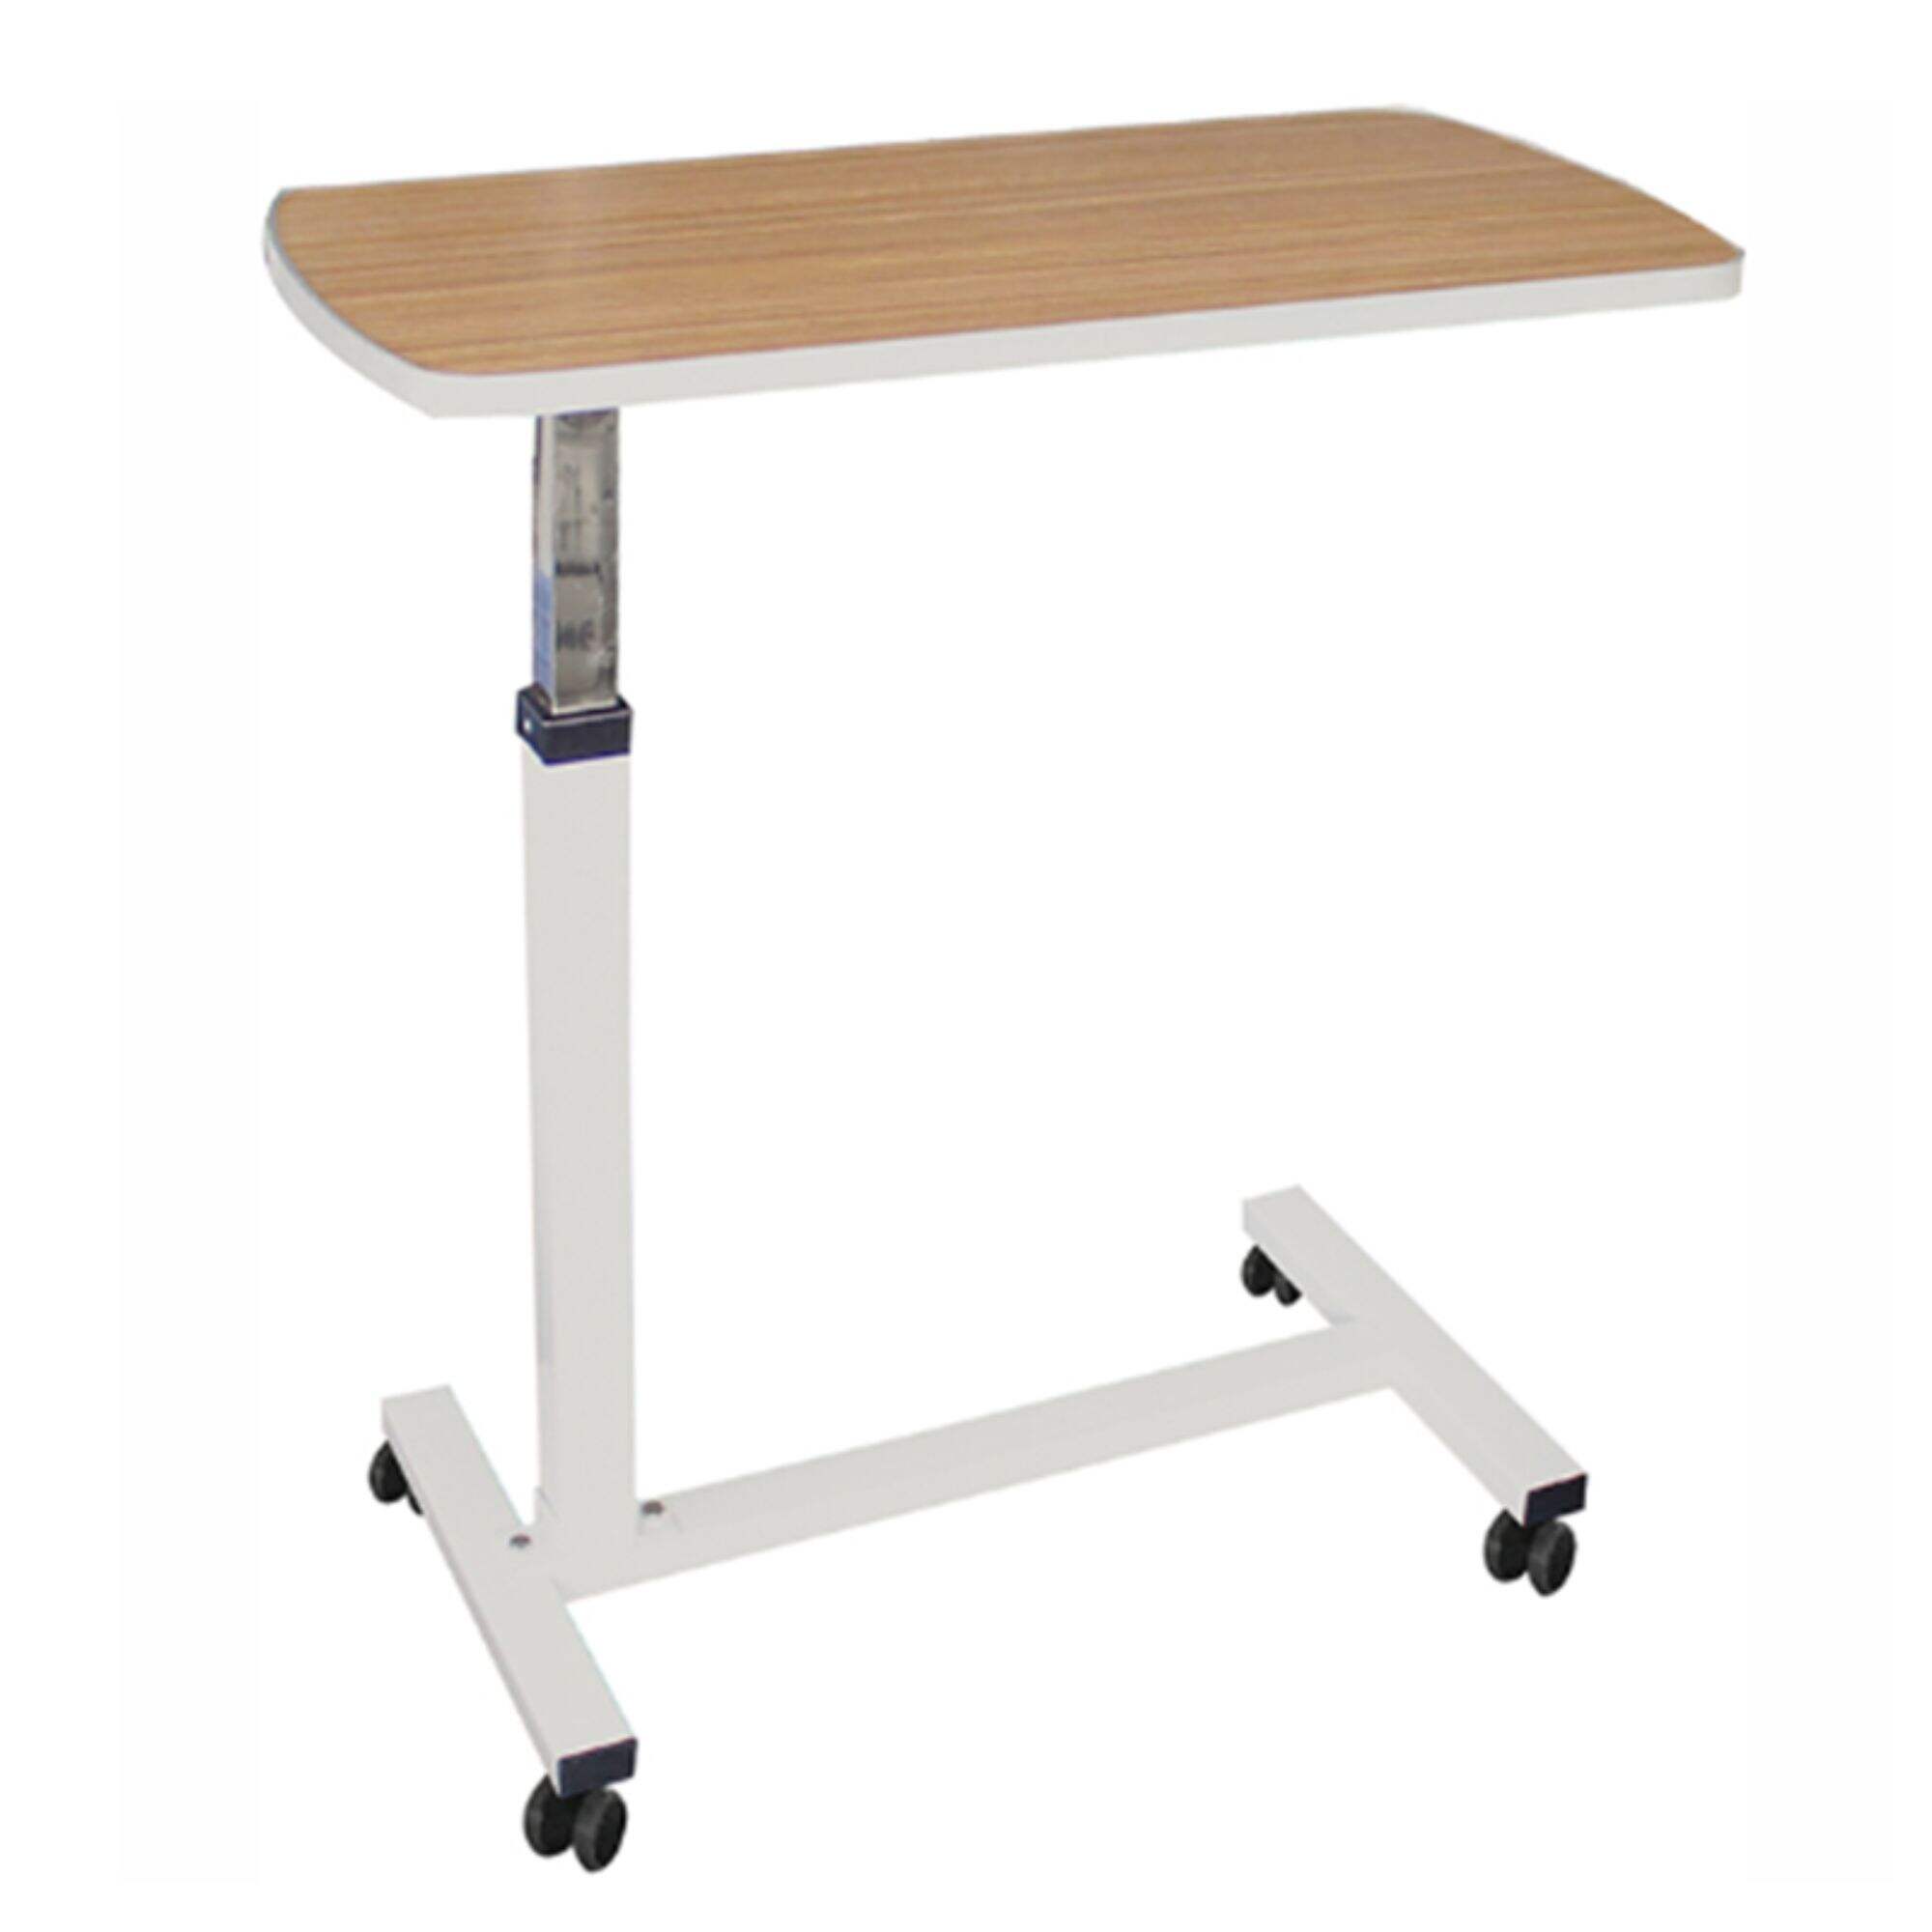 YFT006 Overbed Table